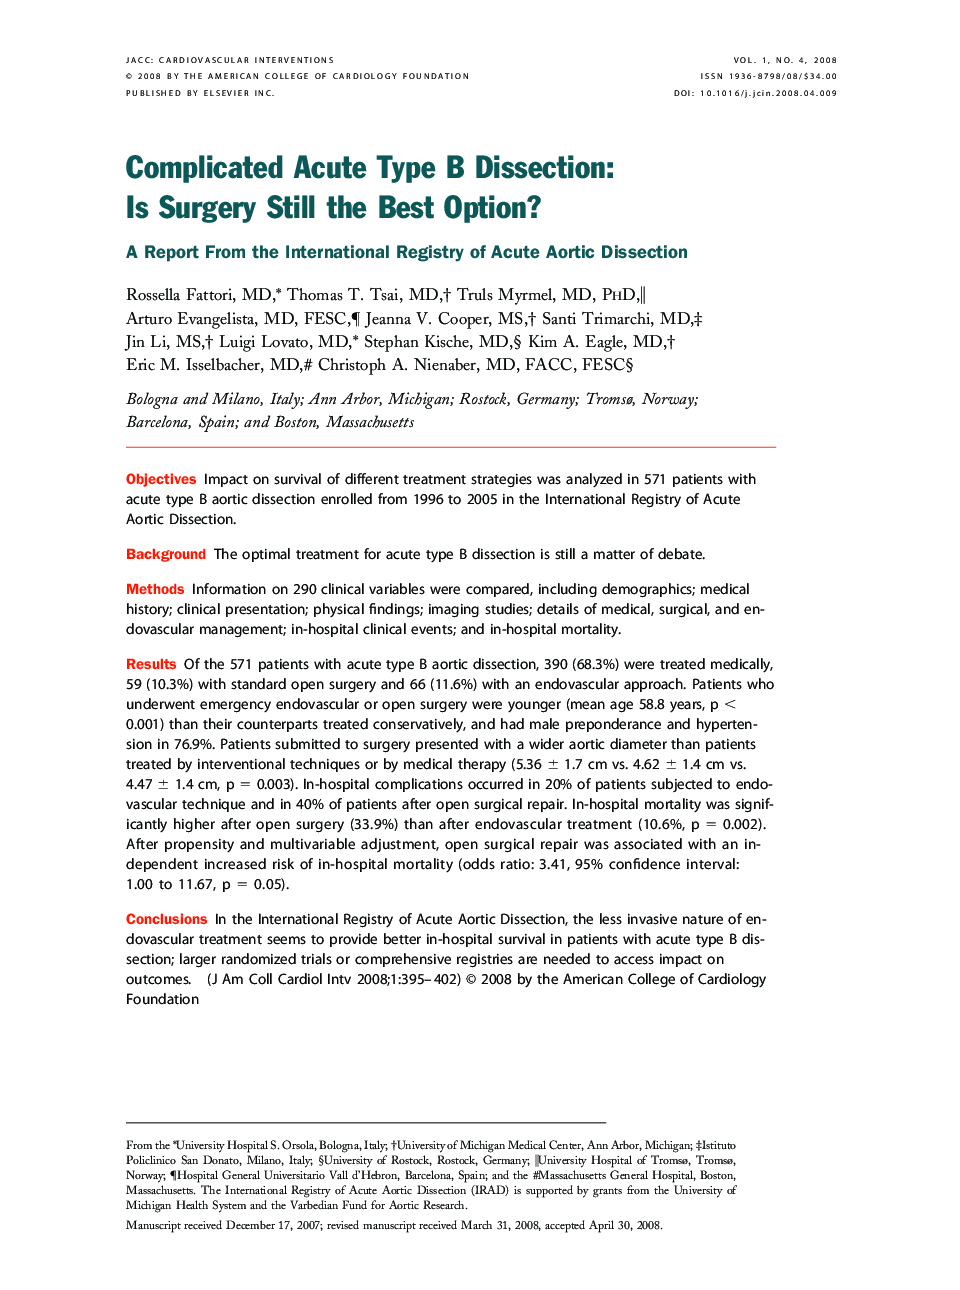 Complicated Acute Type B Dissection: Is Surgery Still the Best Option? : A Report From the International Registry of Acute Aortic Dissection